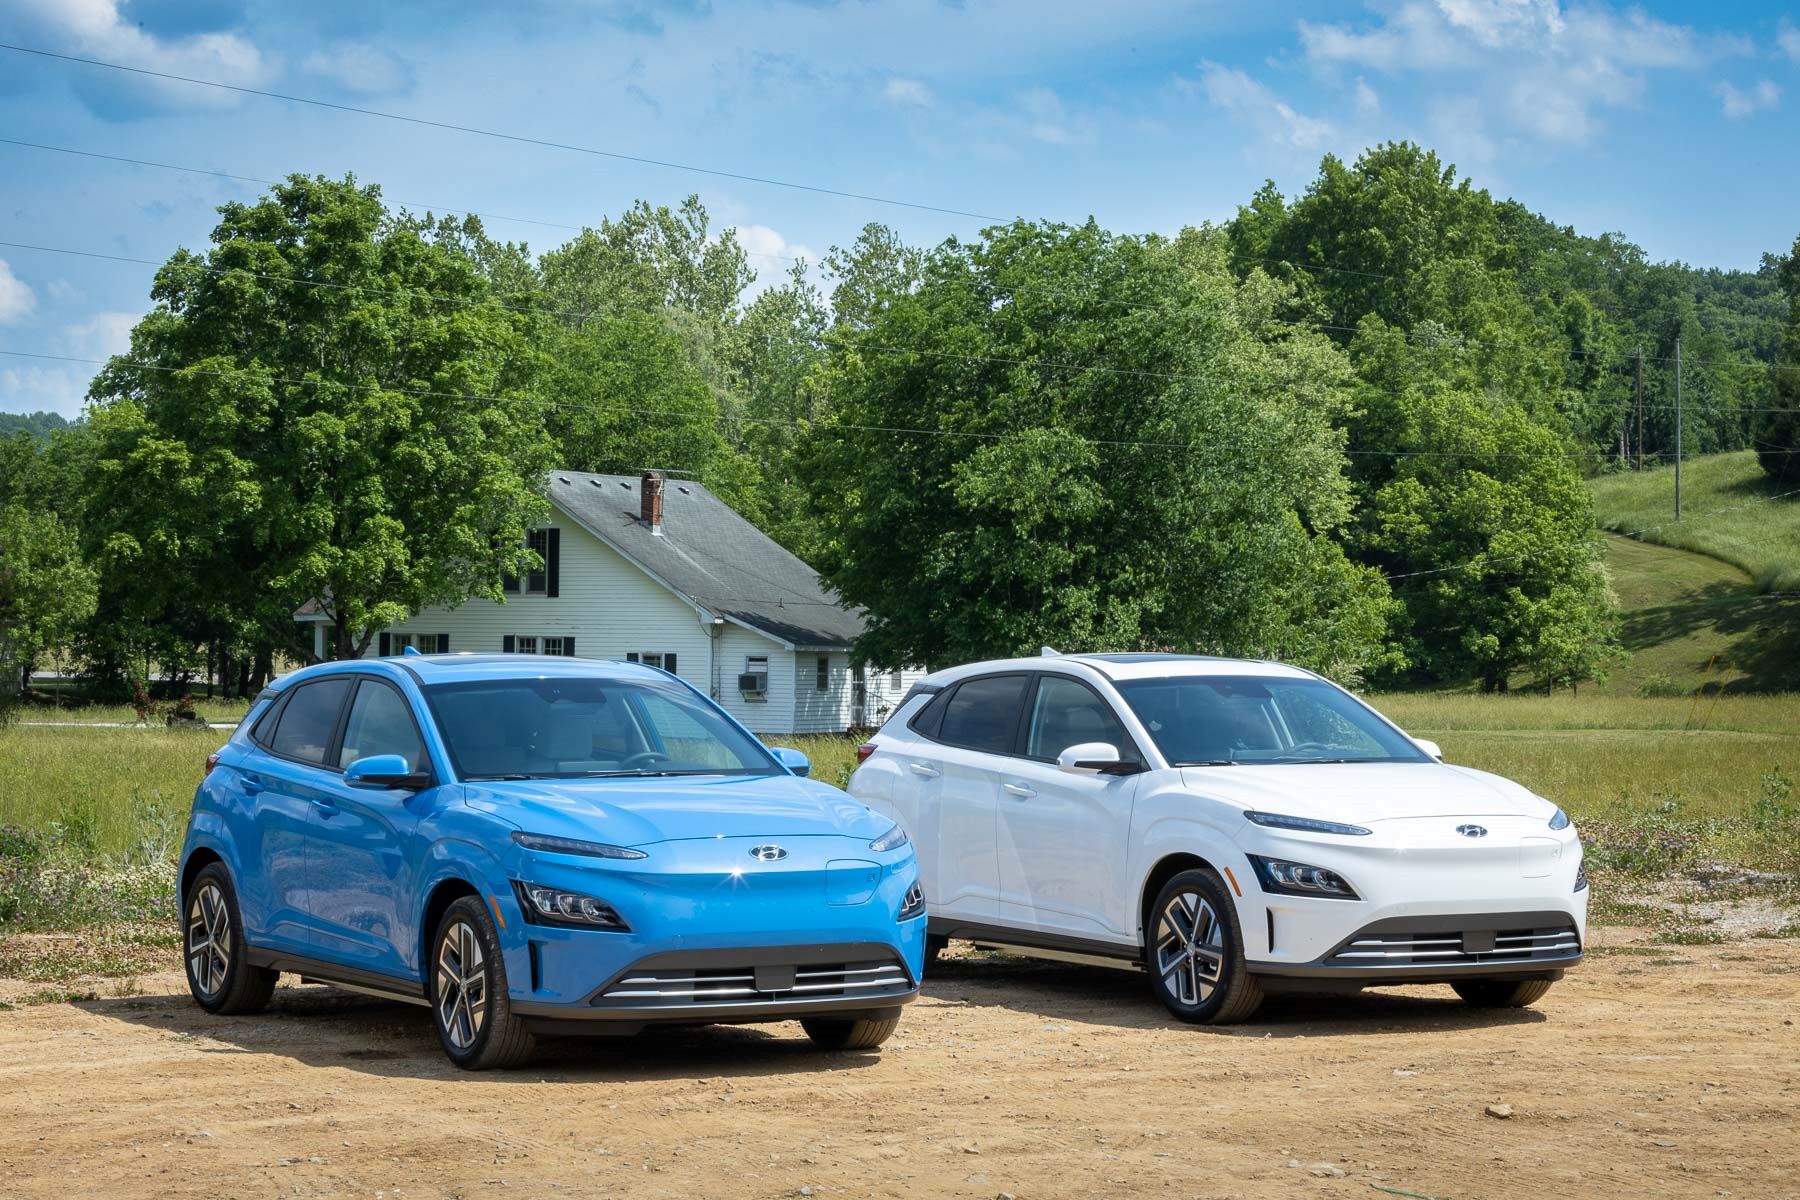 Light blue and white 2022 Hyundai Kona Electric SUV models parked on a dirt path in front of a house surrounded by trees